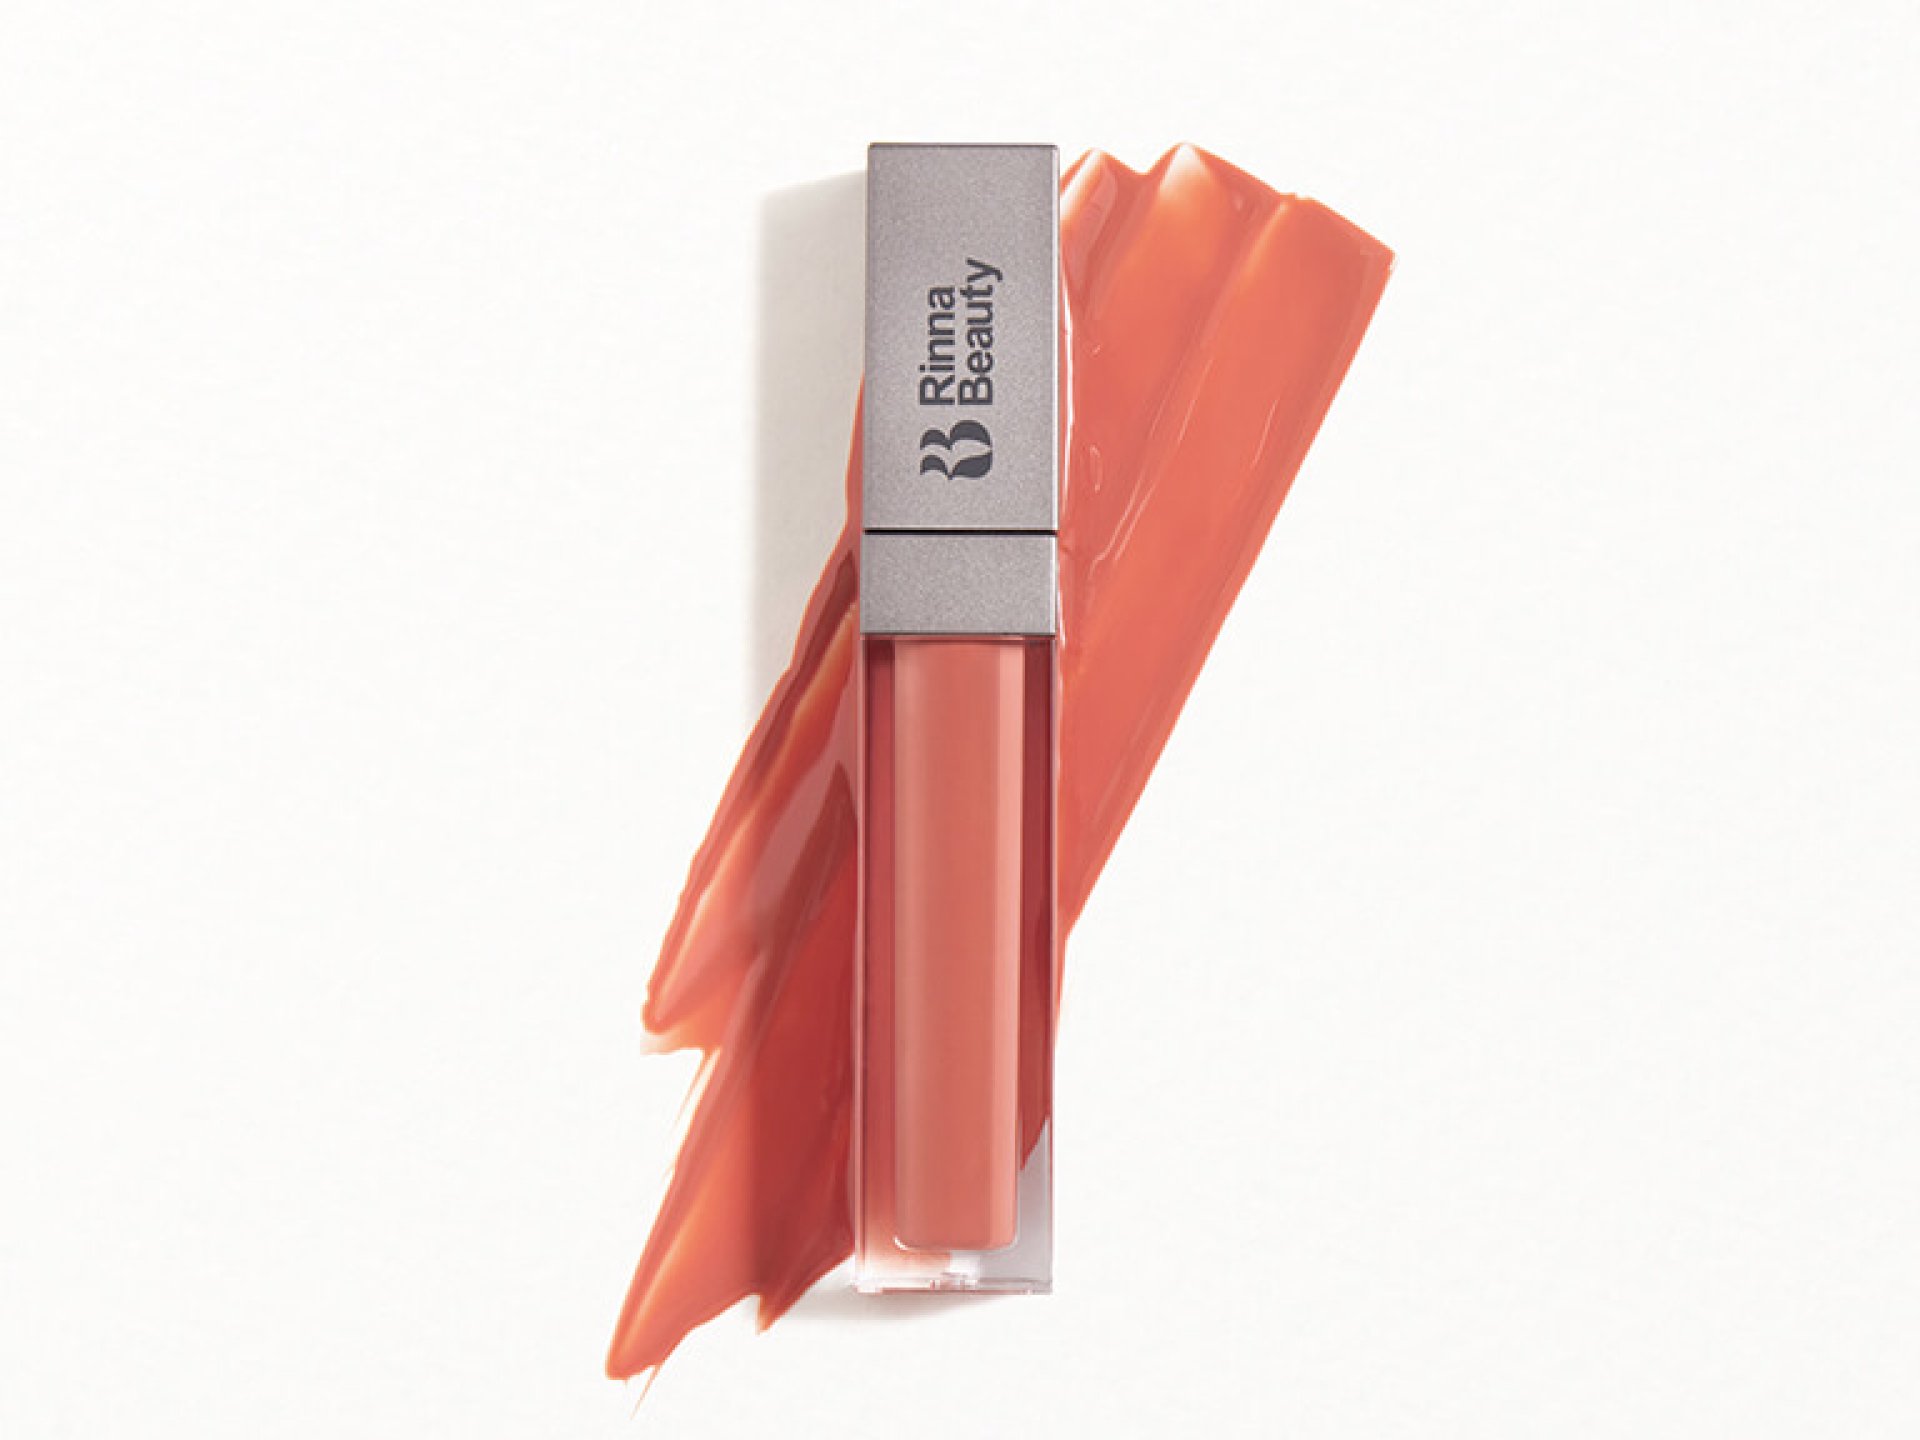 RINNA BEAUTY ICON COLLECTION LIP GLOSS in Guilty Pleasure